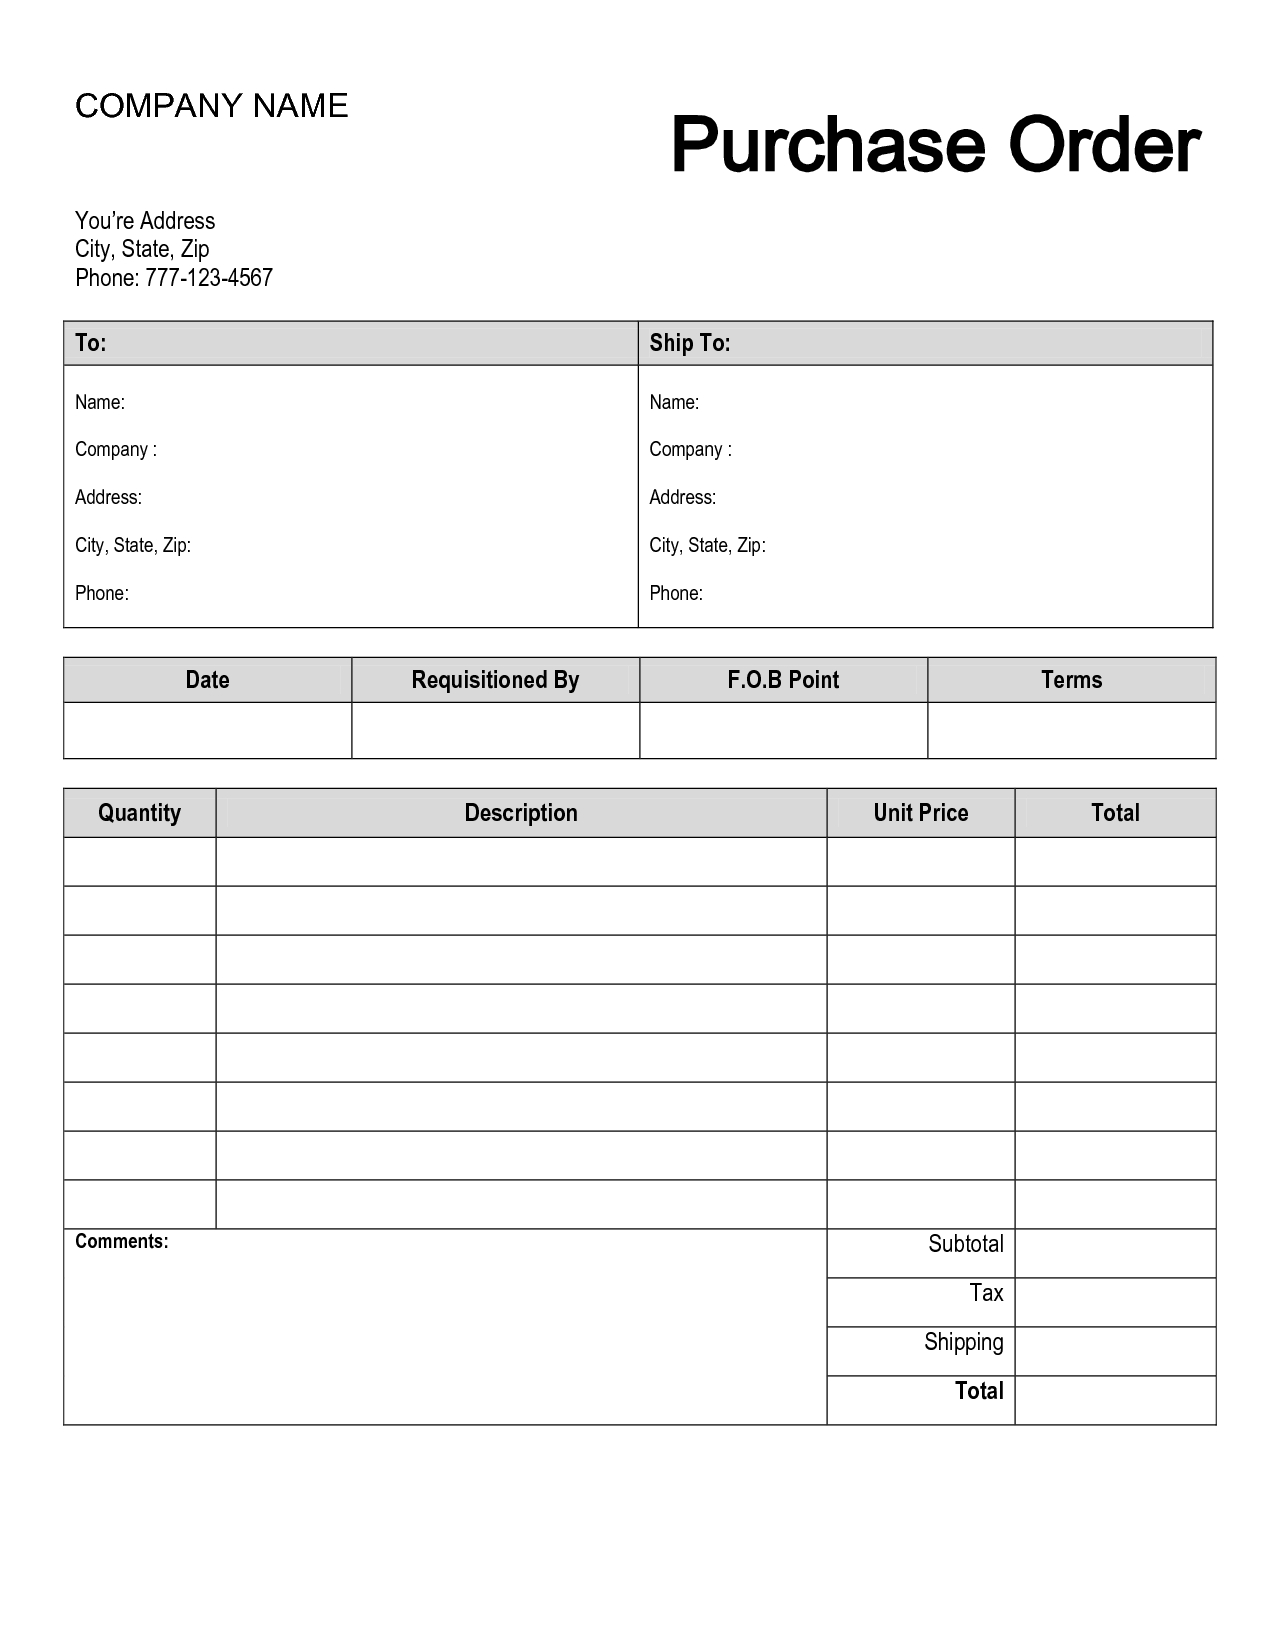 Free Printable Purchase Order Form | Purchase Order | Shop | Order - Find Free Printable Forms Online